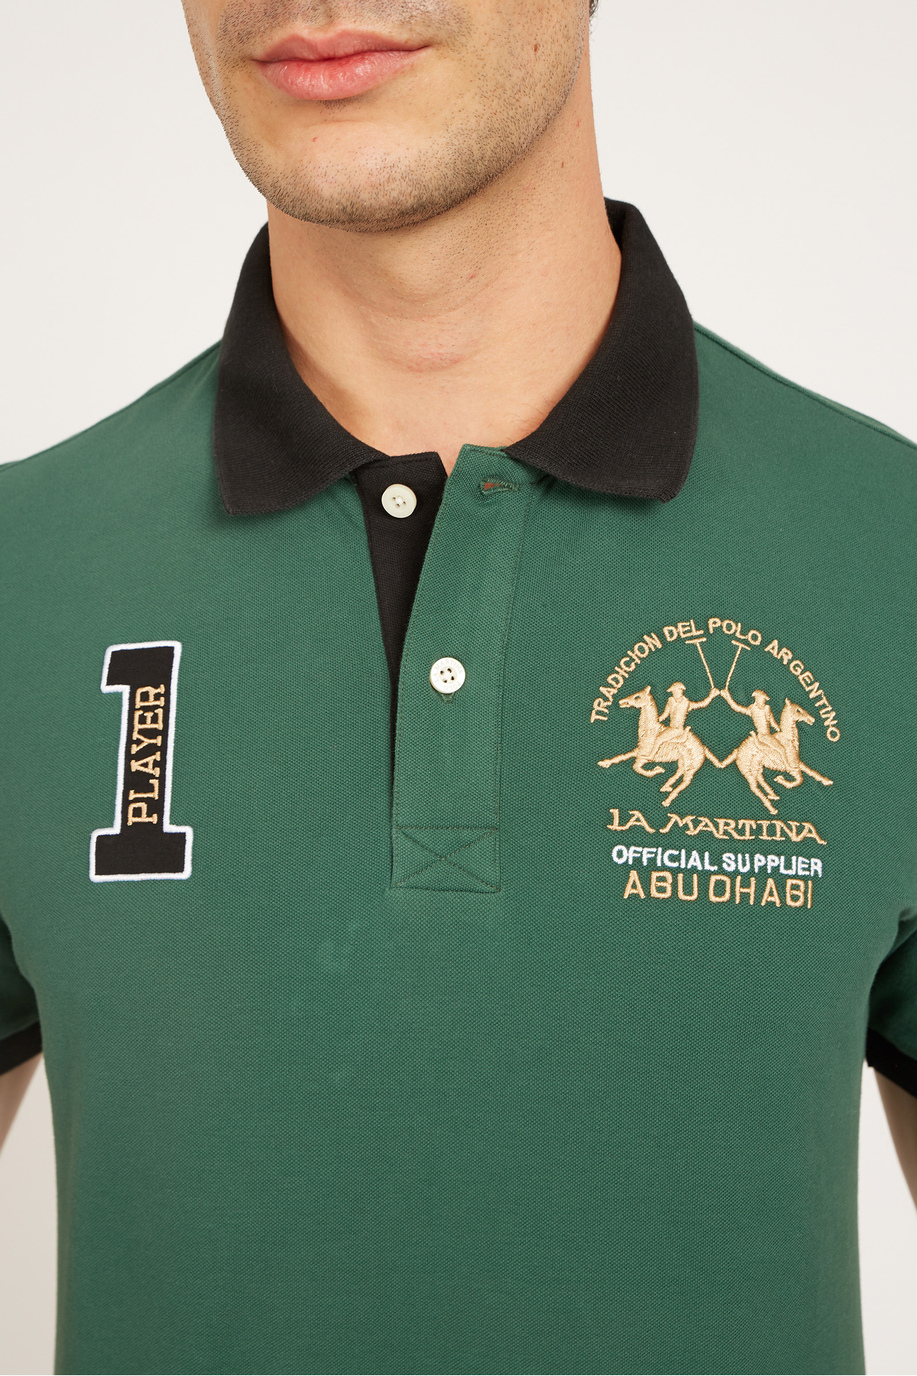 Men's short-sleeved polo shirt in regular fit stretch cotton - Vallee - Replicas of major tournaments | La Martina - Official Online Shop